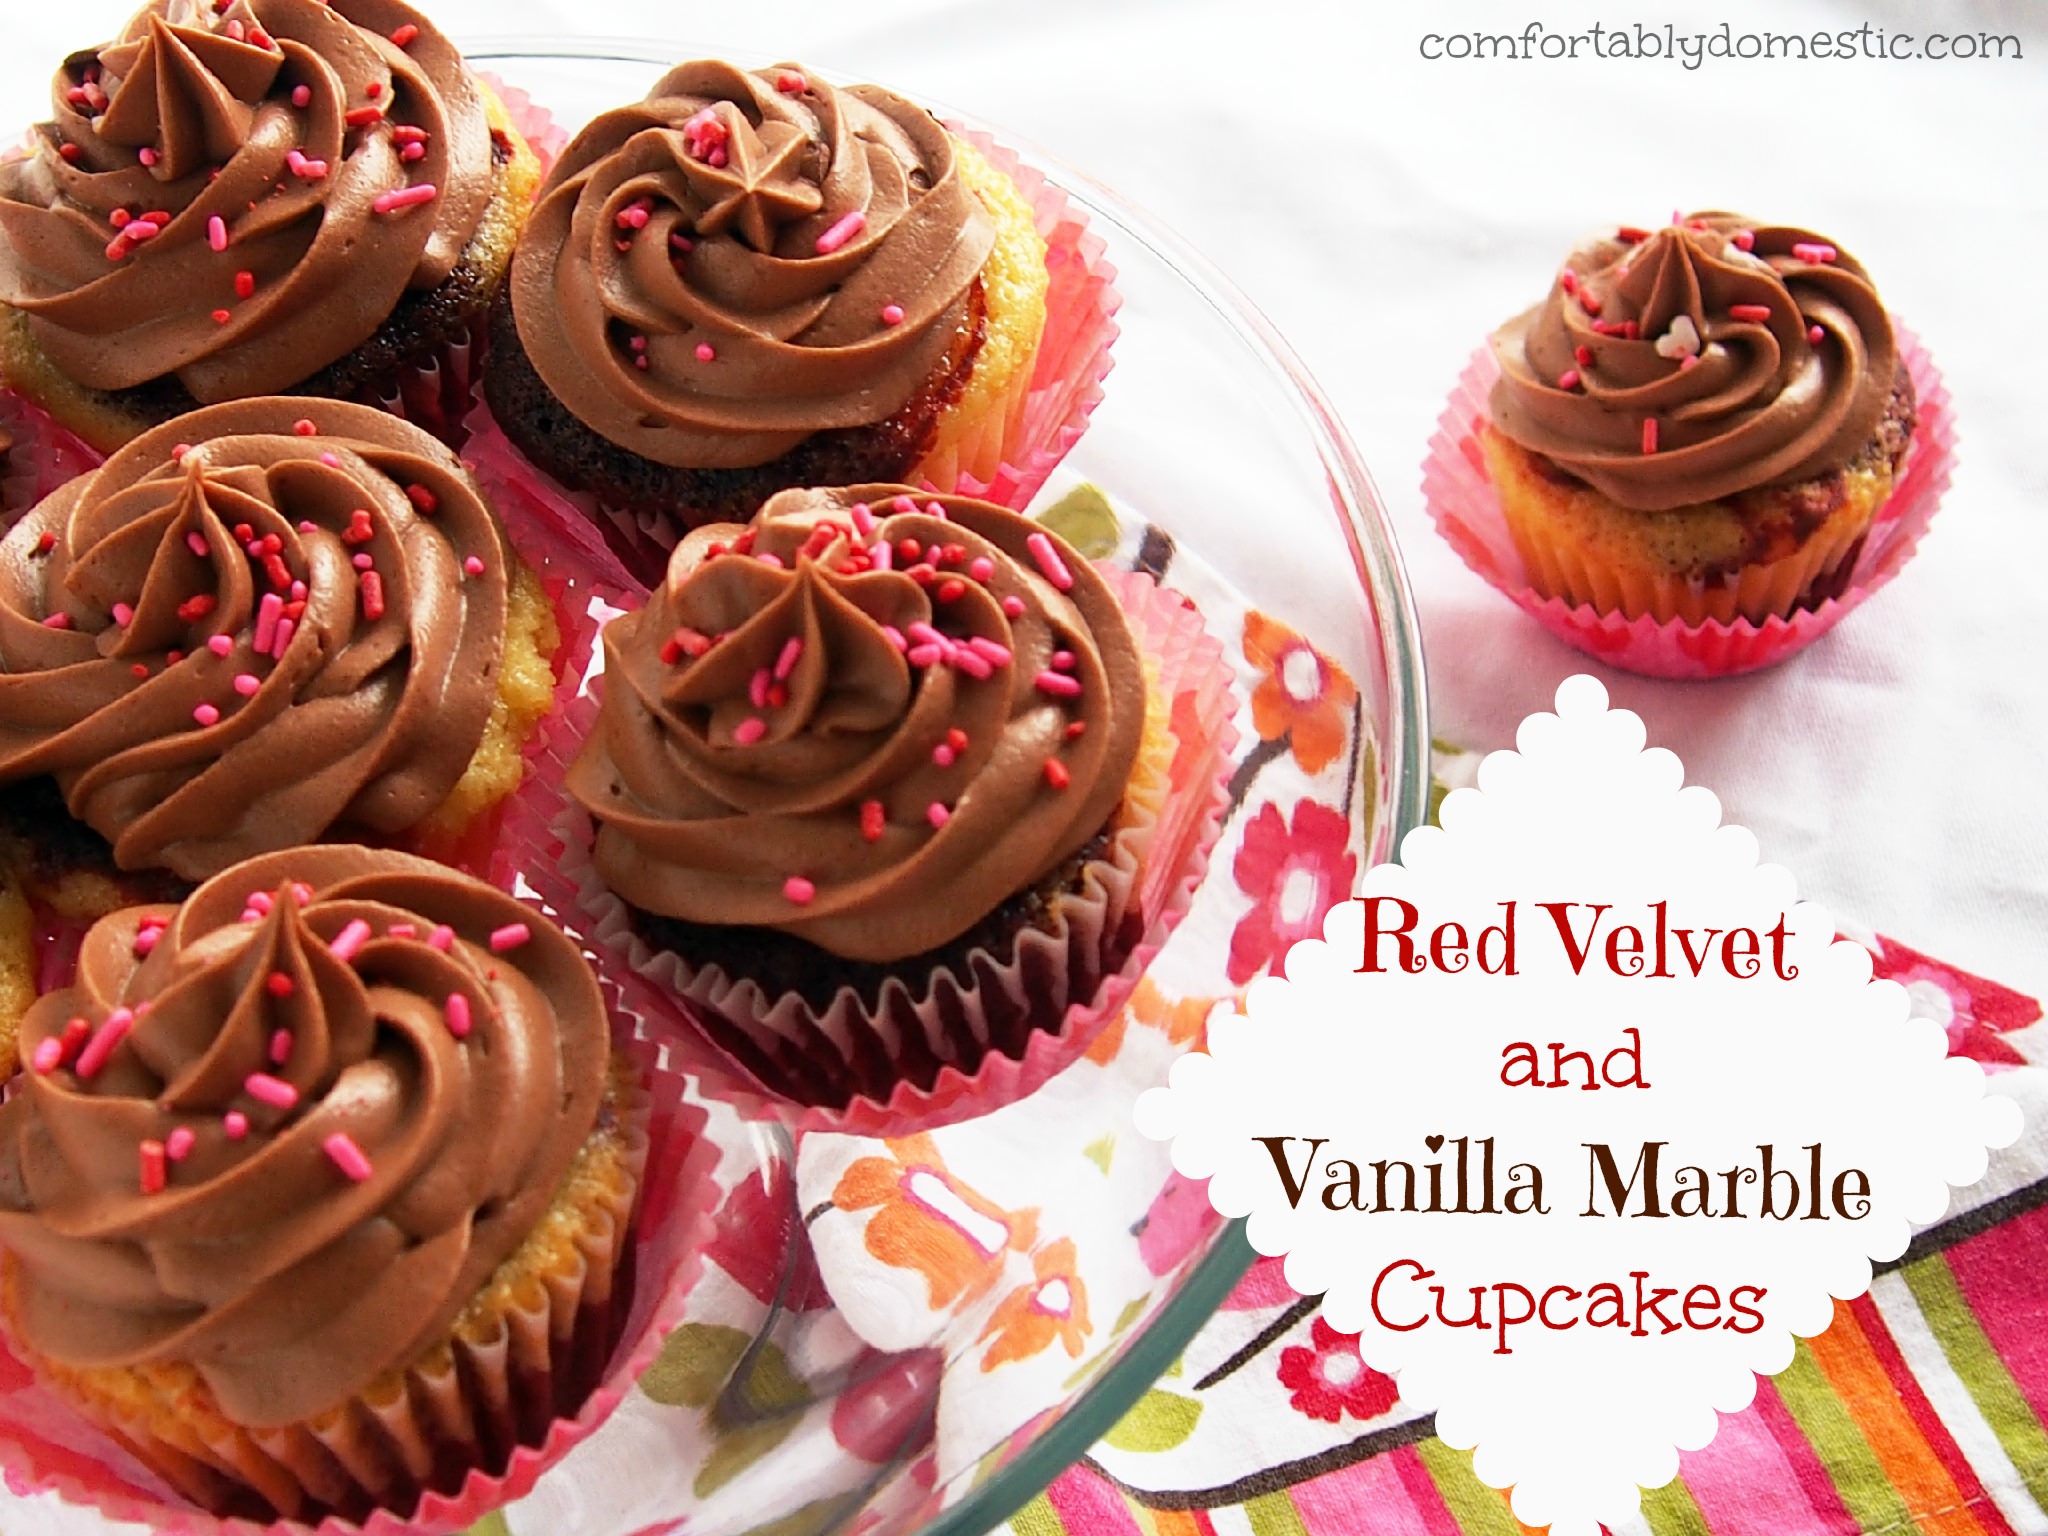 Red Velvet Vanilla Marble Cupcakes are a delicious combination of red velvet cake, marbled with moist vanilla cake. Topped with creamy, rich milk chocolate buttercream frosting. | ComfortablyDomestic.com